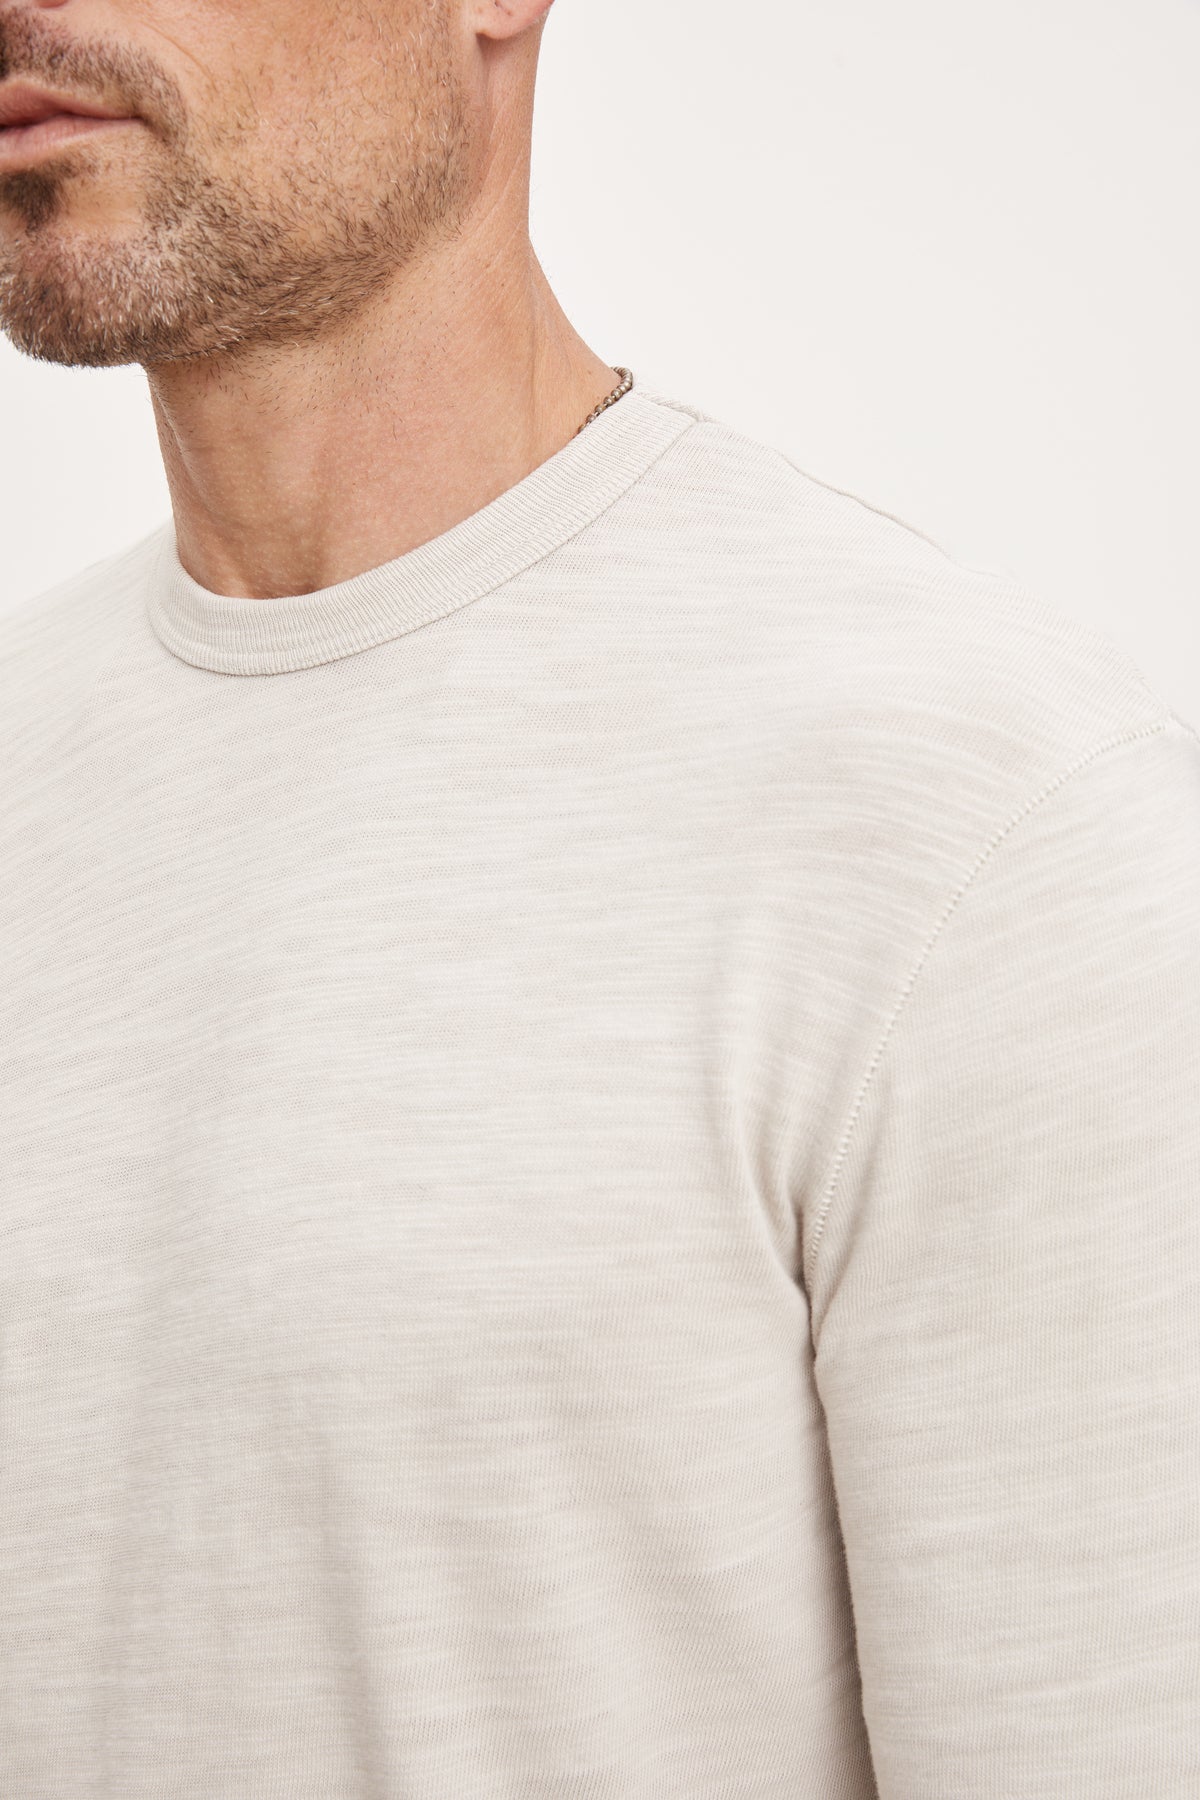 A man wearing a Velvet by Graham & Spencer Palmer Crew Neck Tee made of soft cotton slub knit.-36008977596609